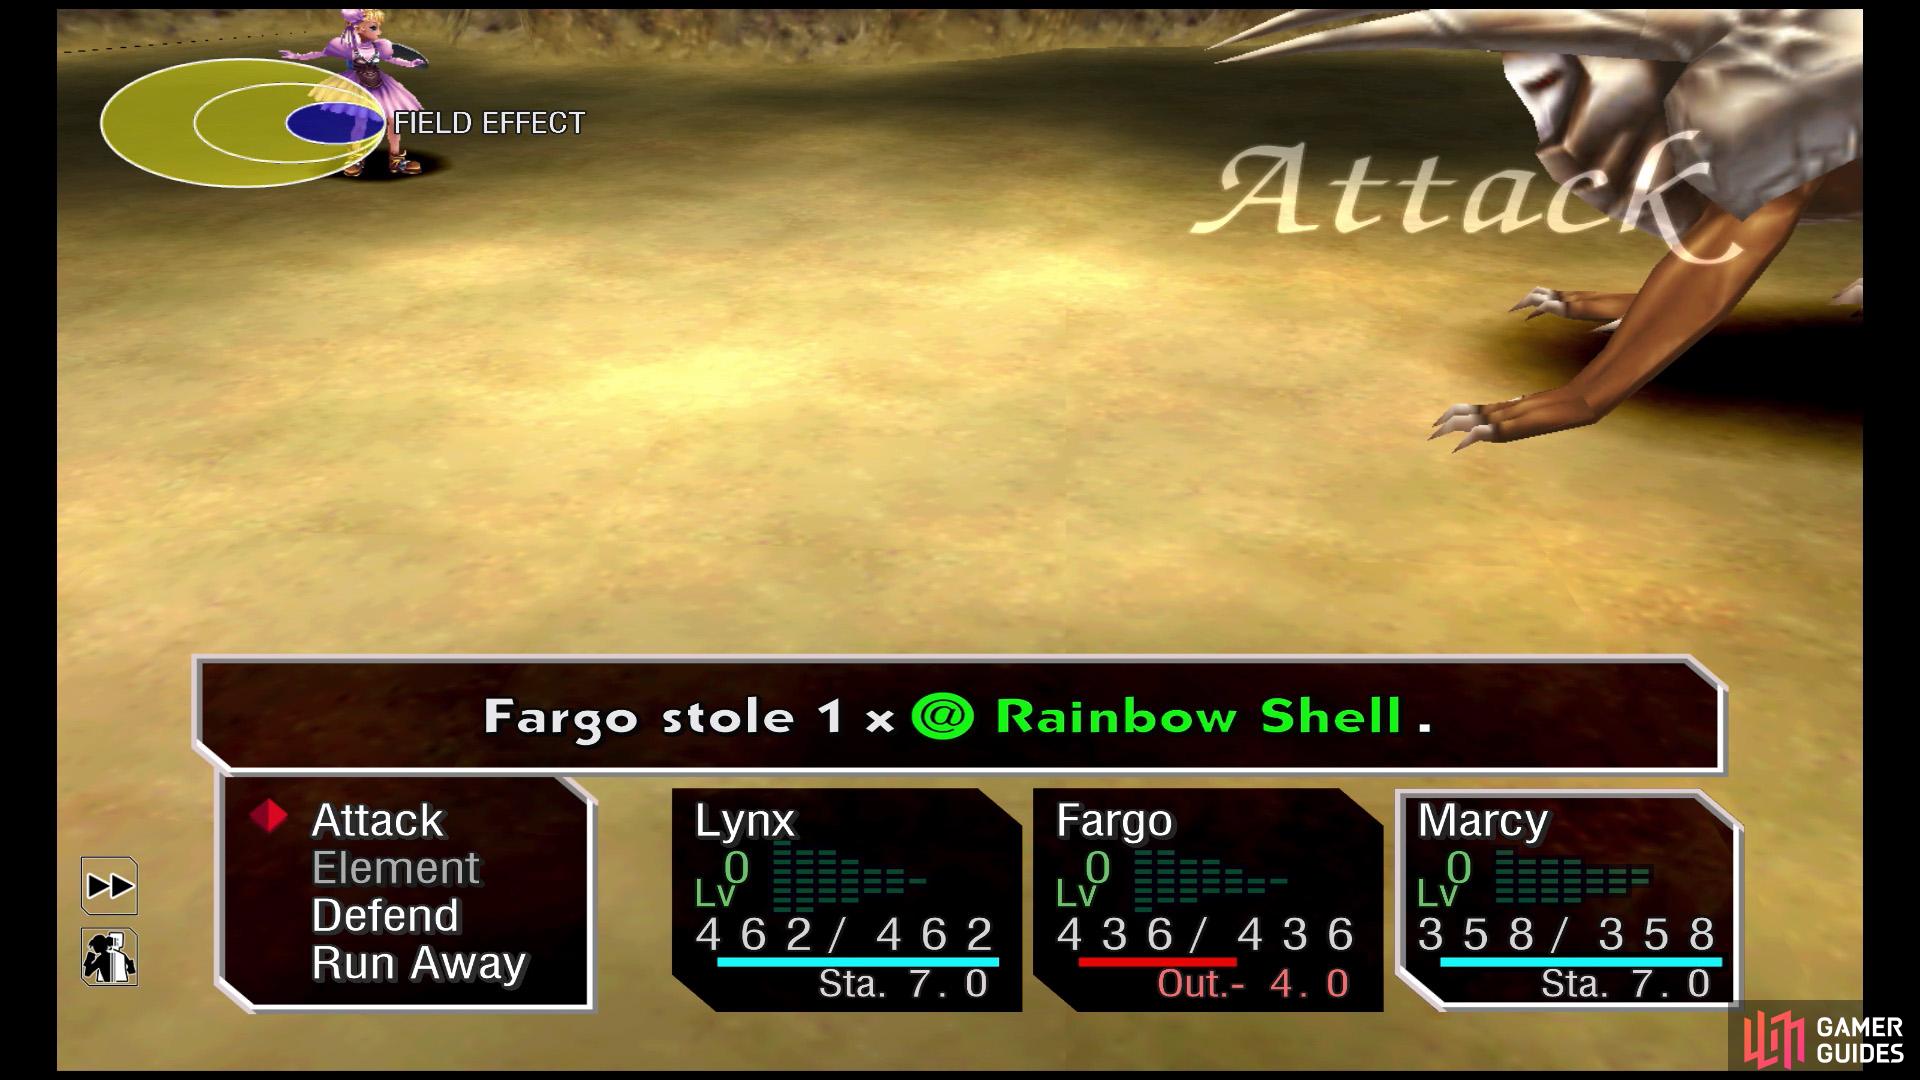 Your goal is to steal a Rainbow Shell.